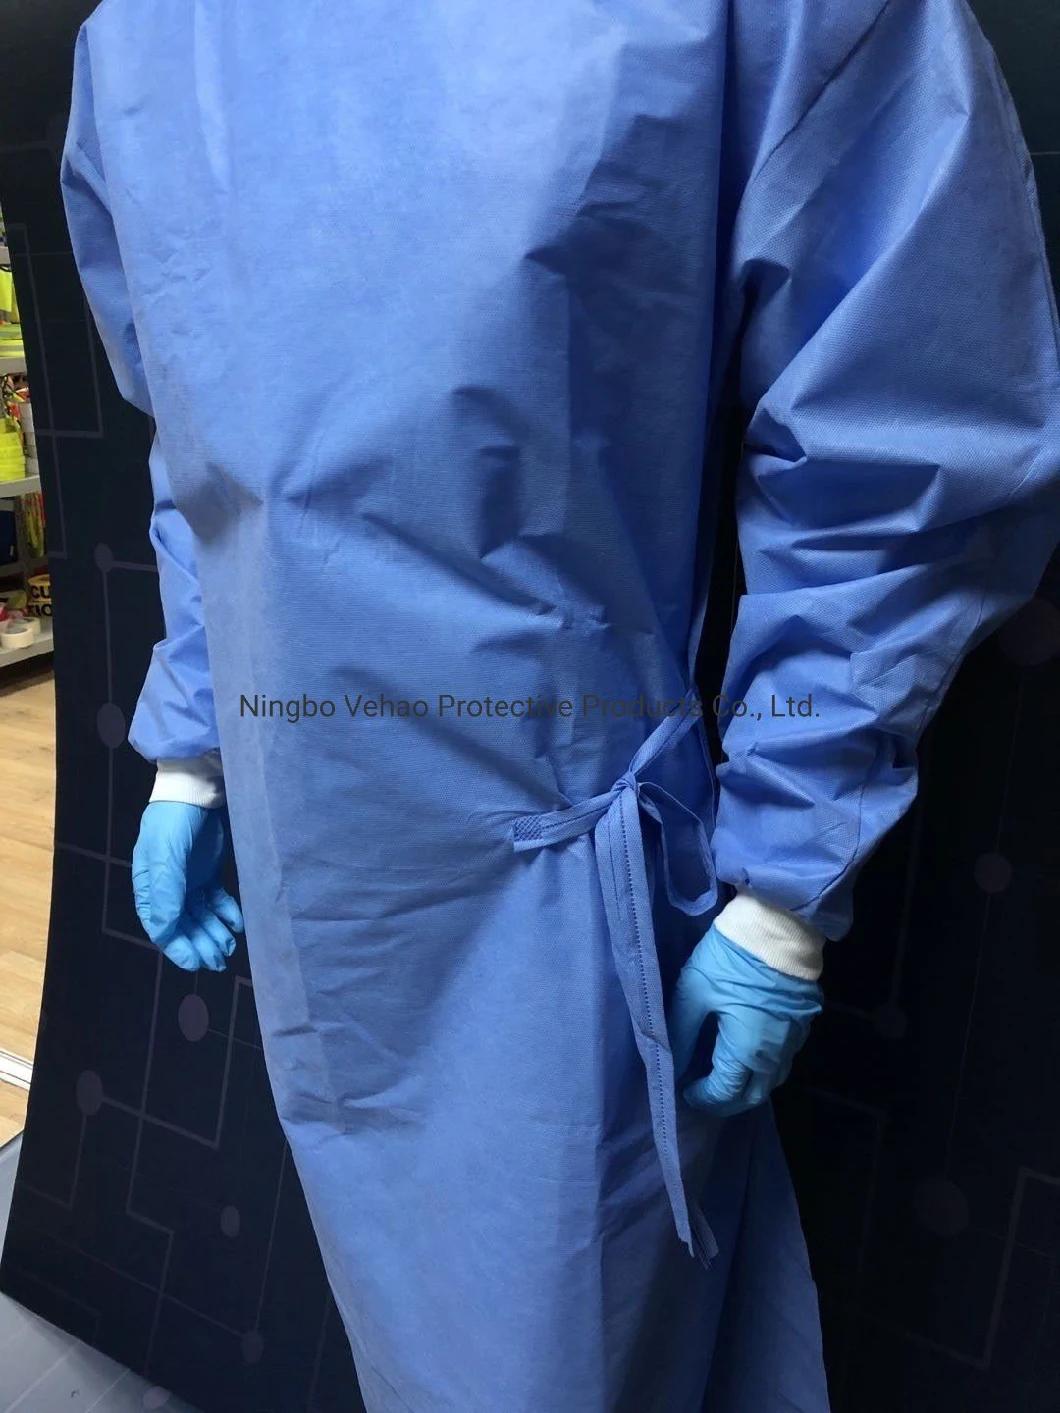 Level 3 Sterilized Surgical Gown Dfco-0150